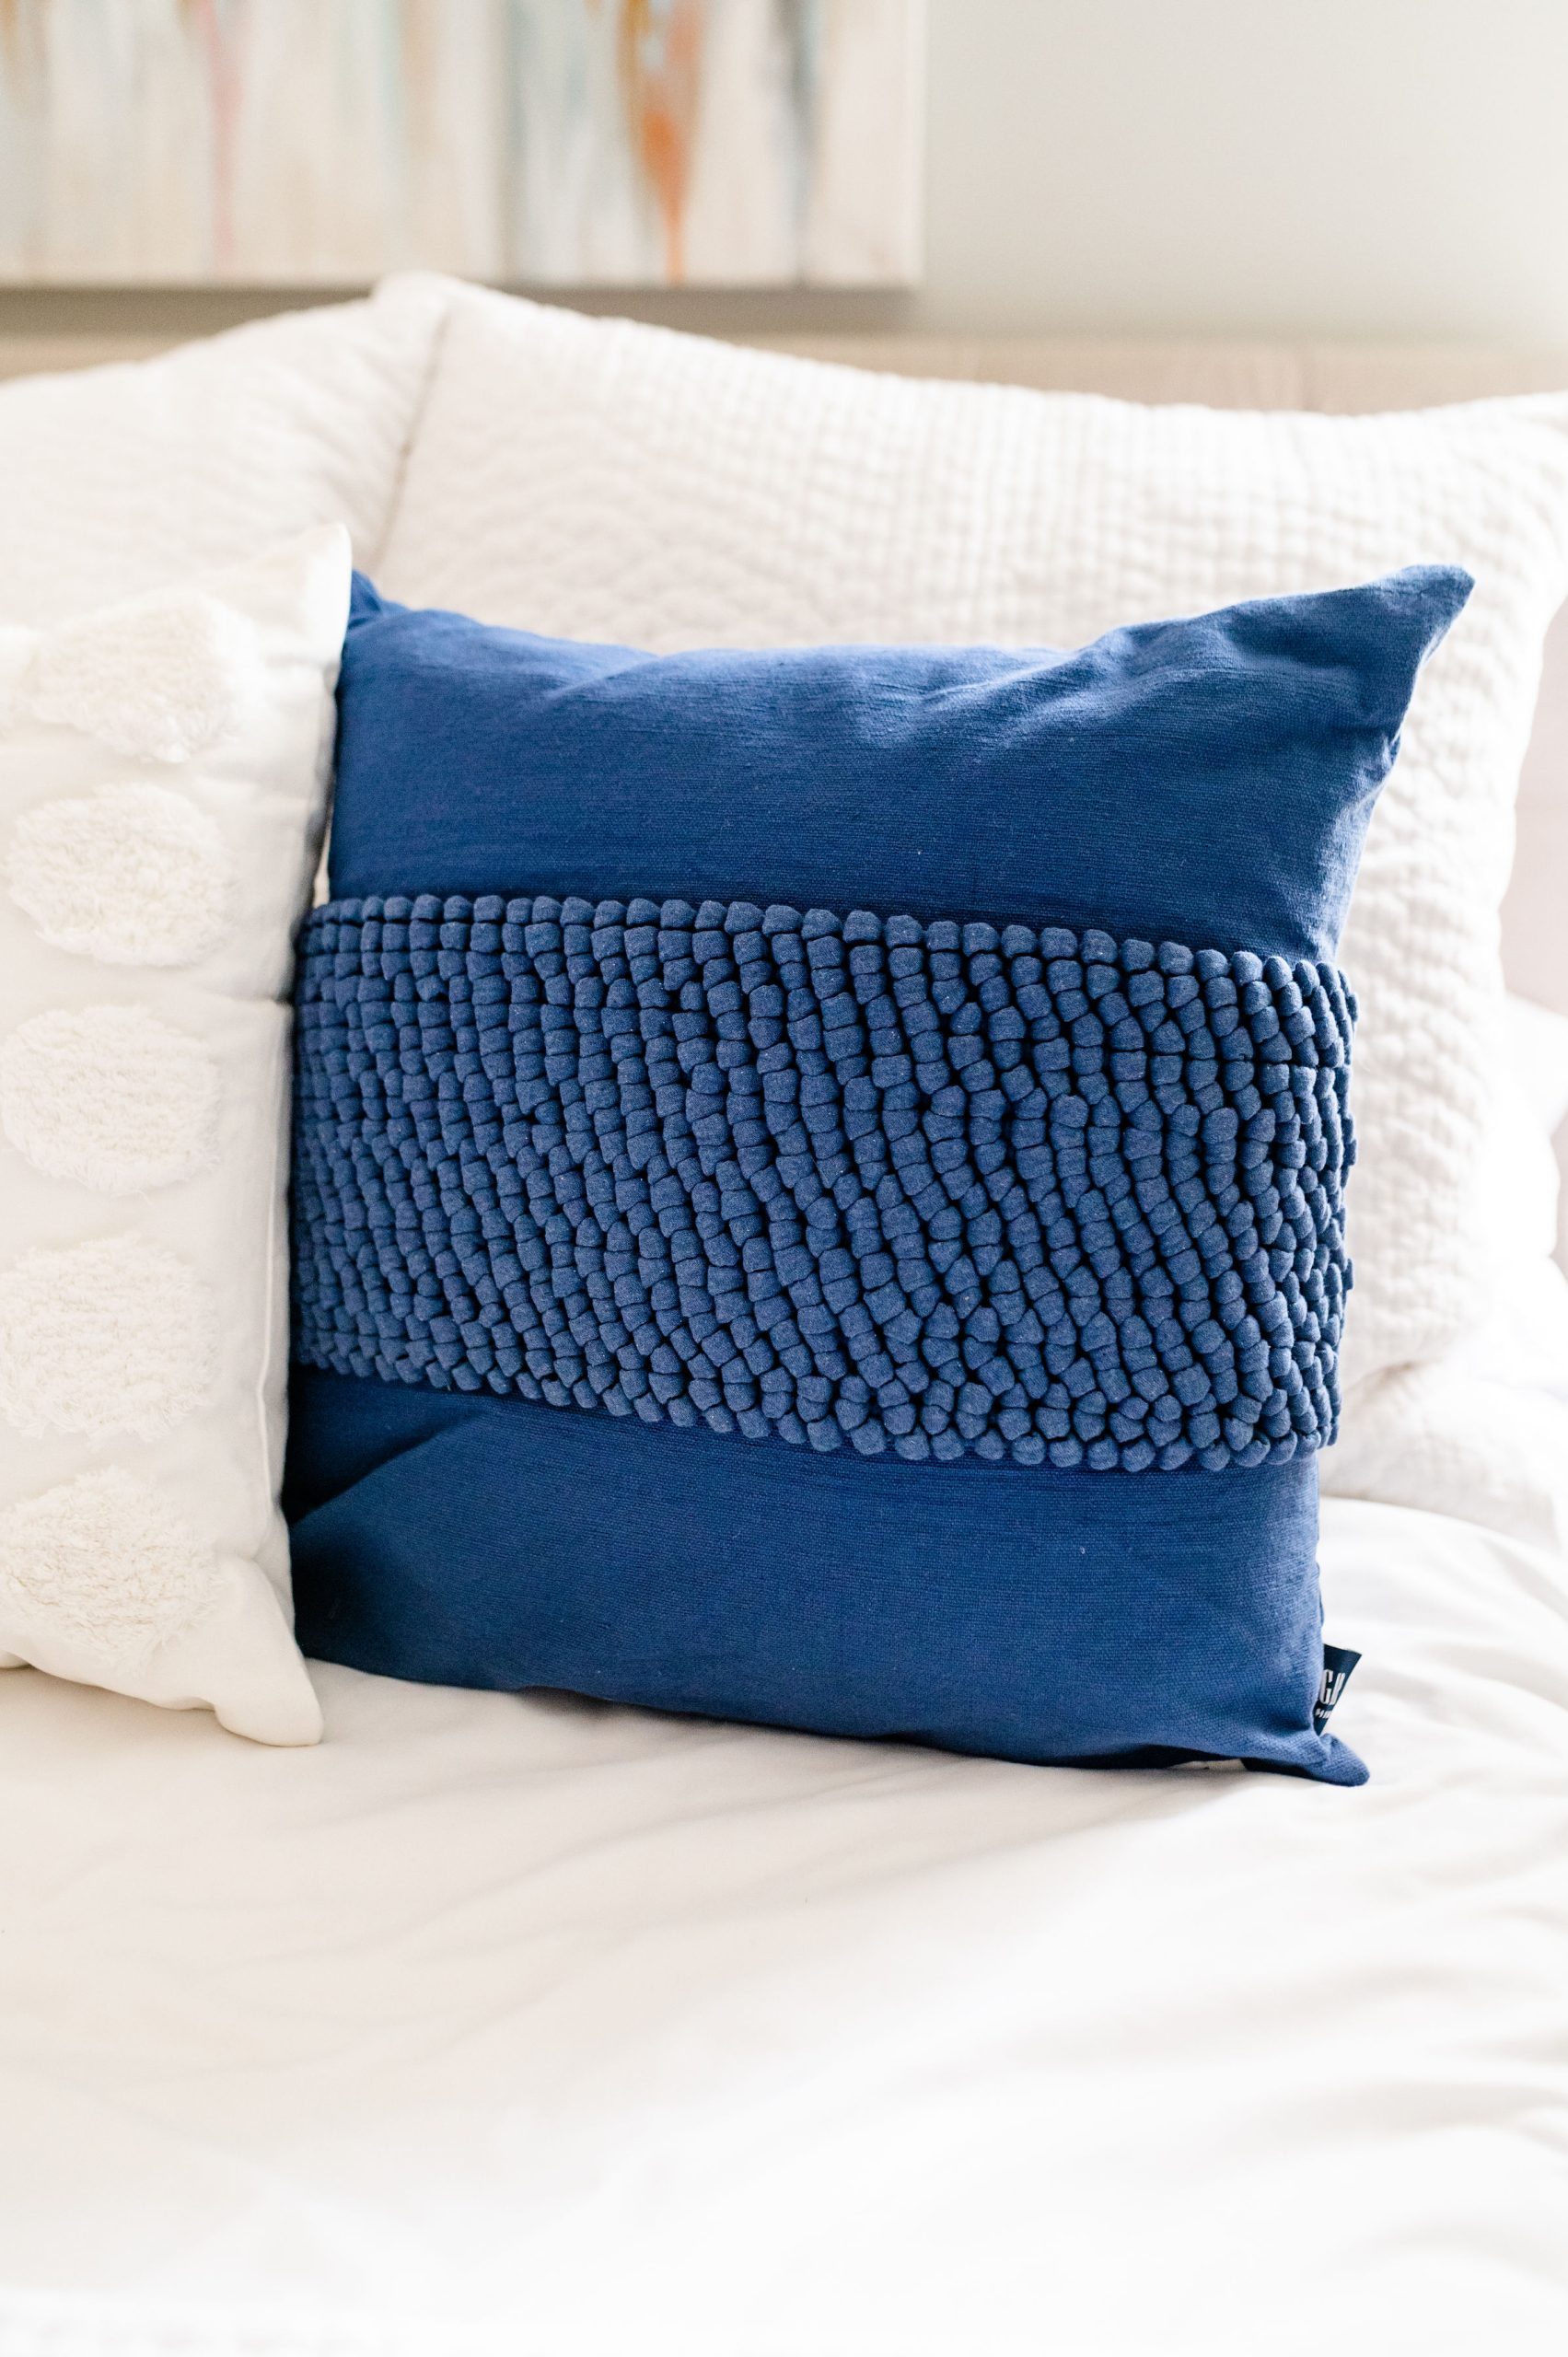 Gap Home Furniture Is Now at Walmart—Here's What to Shop